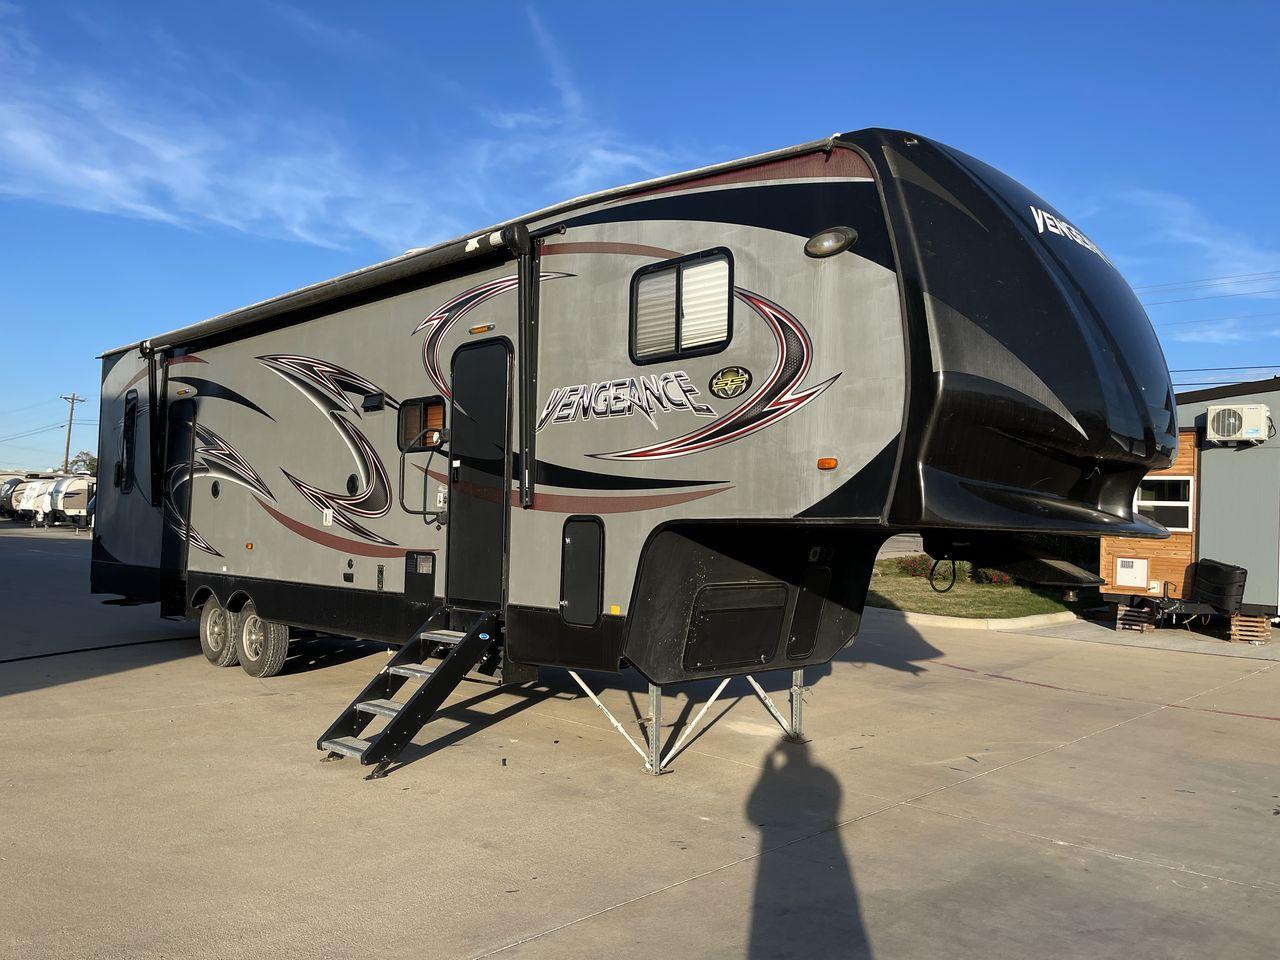 2014 WHITE FOREST RIVER VENGEANCE 312A (4X4FVGG22EY) , Length: 37.92 ft. | Dry Weight: 10,068 lbs. | Gross Weight: 14,508 lbs. | Slides: 1 transmission, located at 4319 N Main St, Cleburne, TX, 76033, (817) 678-5133, 32.385960, -97.391212 - This 2014 Vengeance Toy Hauler has a dry weight of 10,068 lbs and a GVWR of 14,508 lbs with a hitch weight of 2,508 lbs. This unit also has automatic heating and cooling for optimal temperature control. The exterior of this toy hauler is a simple cream base with black and red accents. This model als - Photo #23